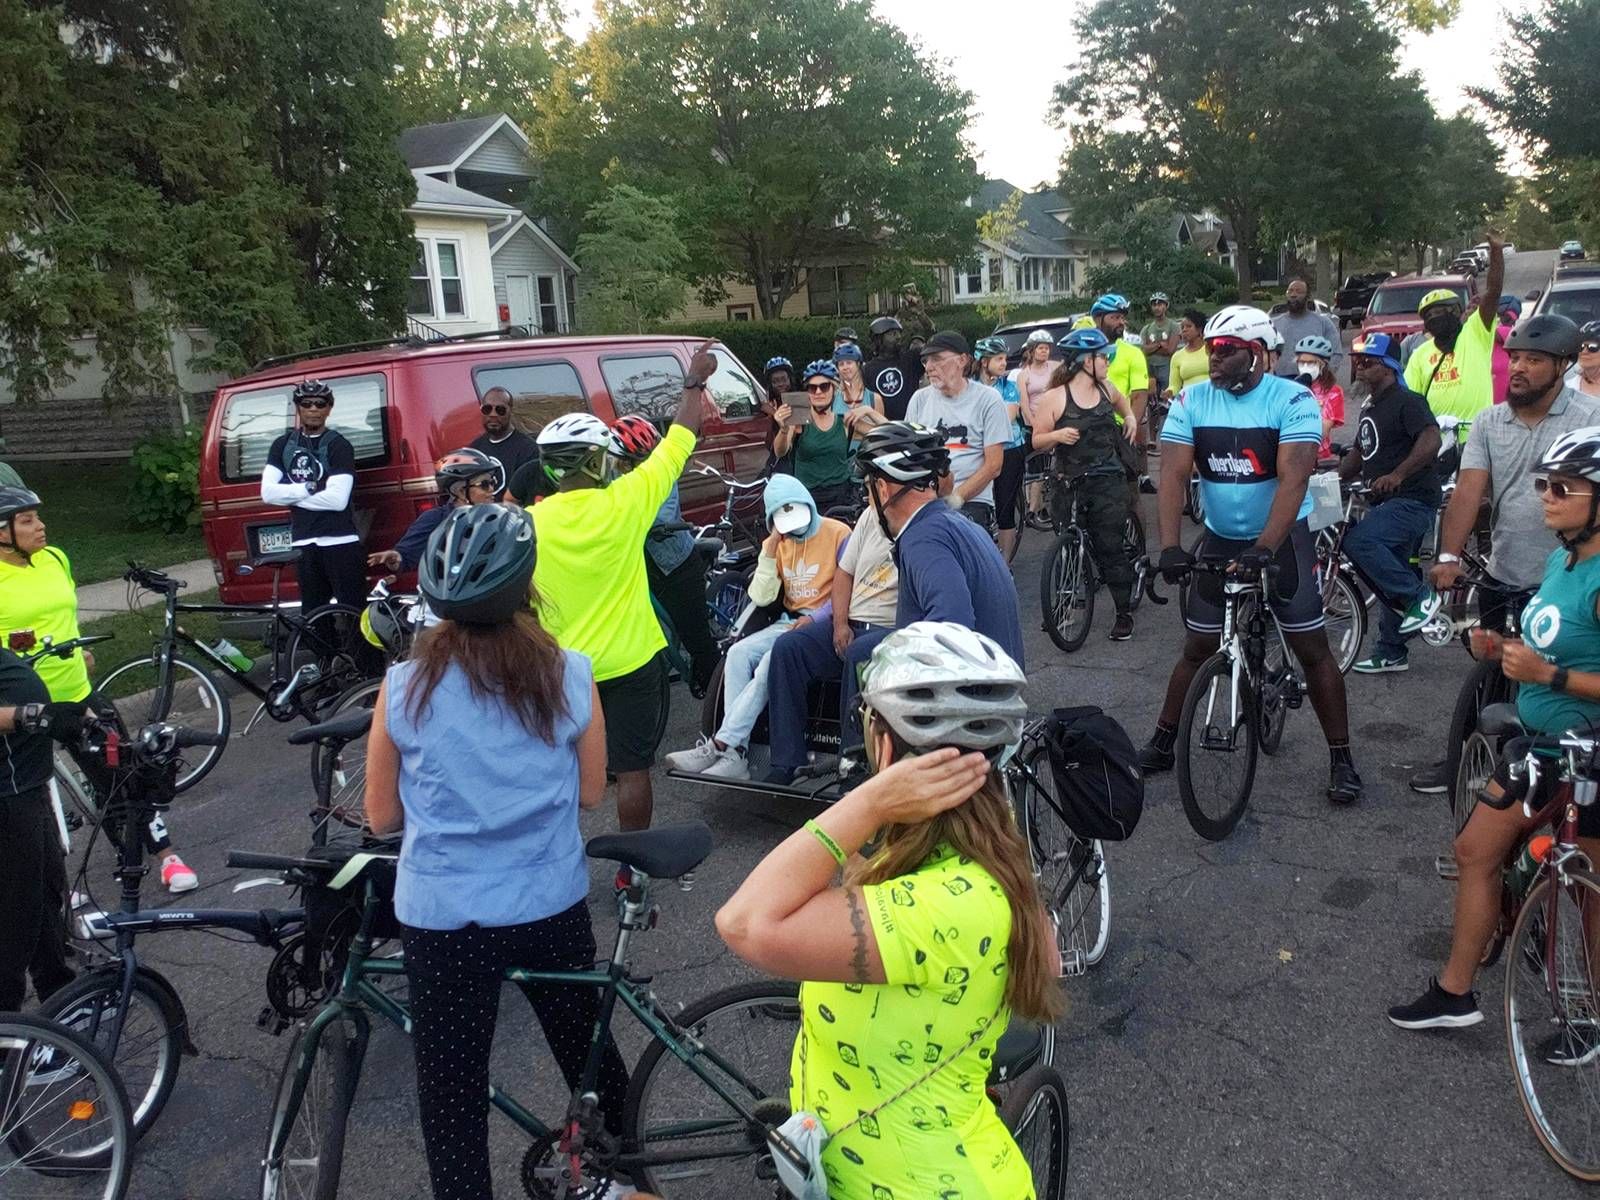 A group of bicyclists stand in a city street, listening to a speaker.